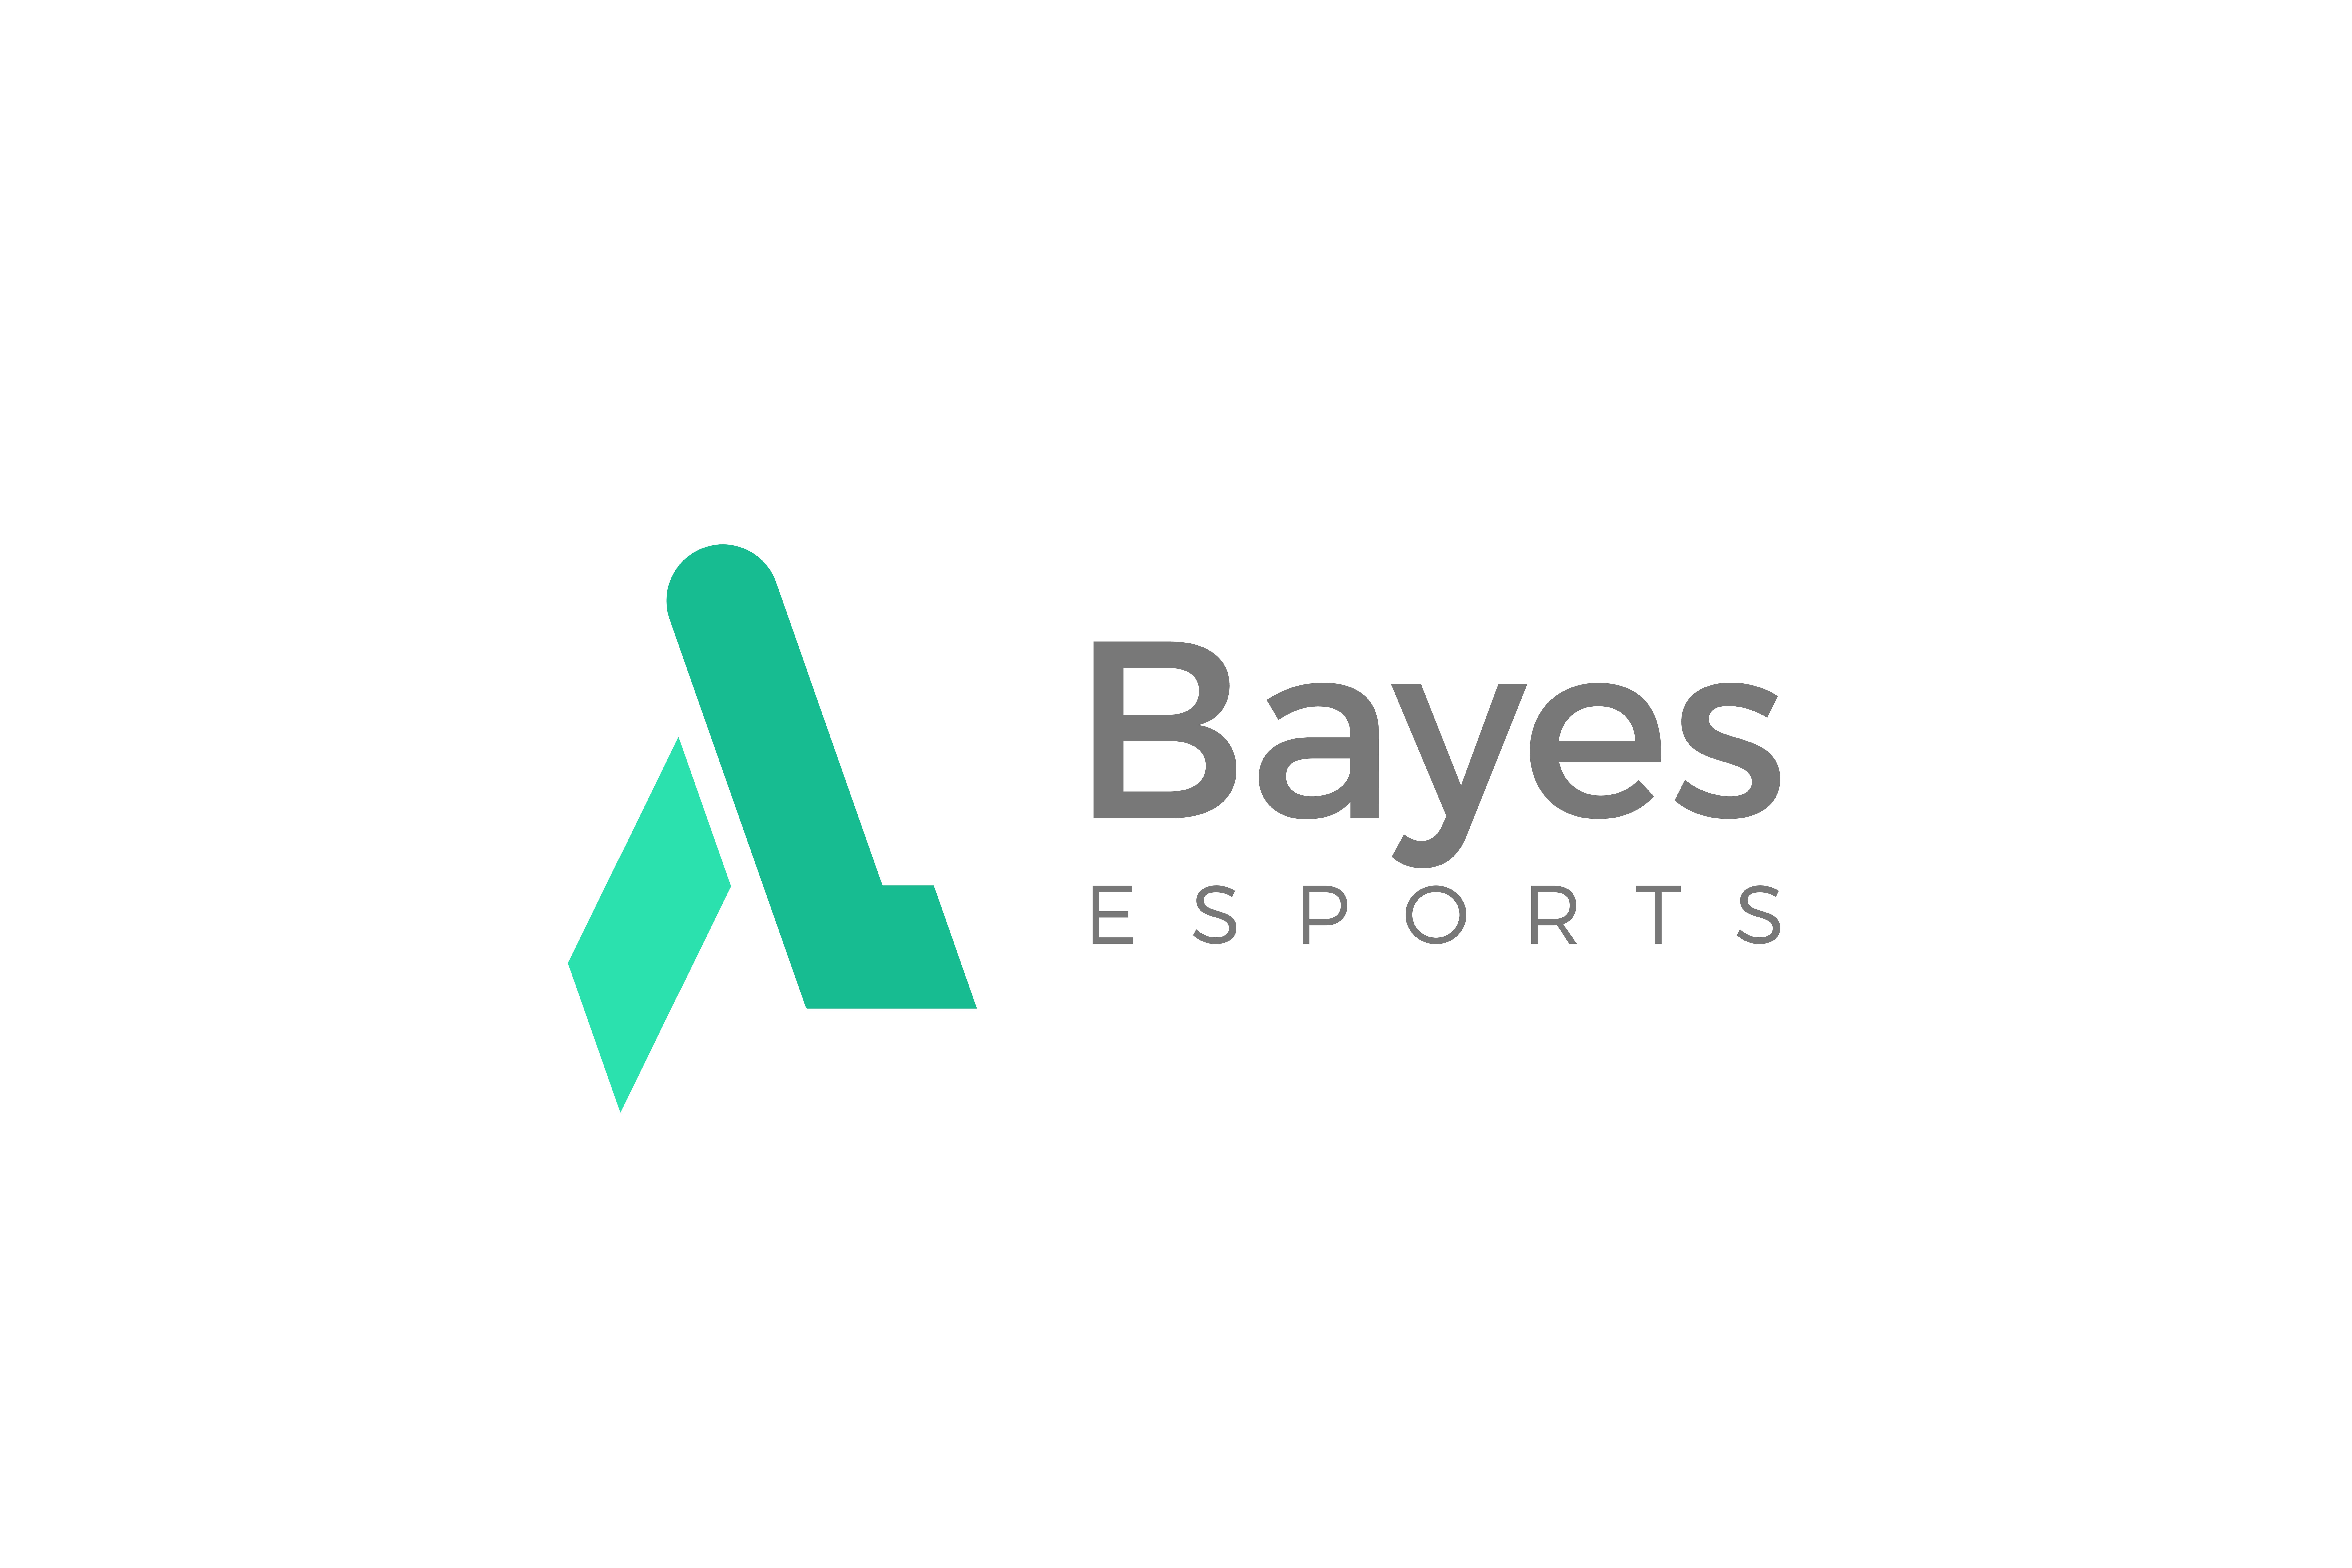 Bayes Esports Solutions GmbH